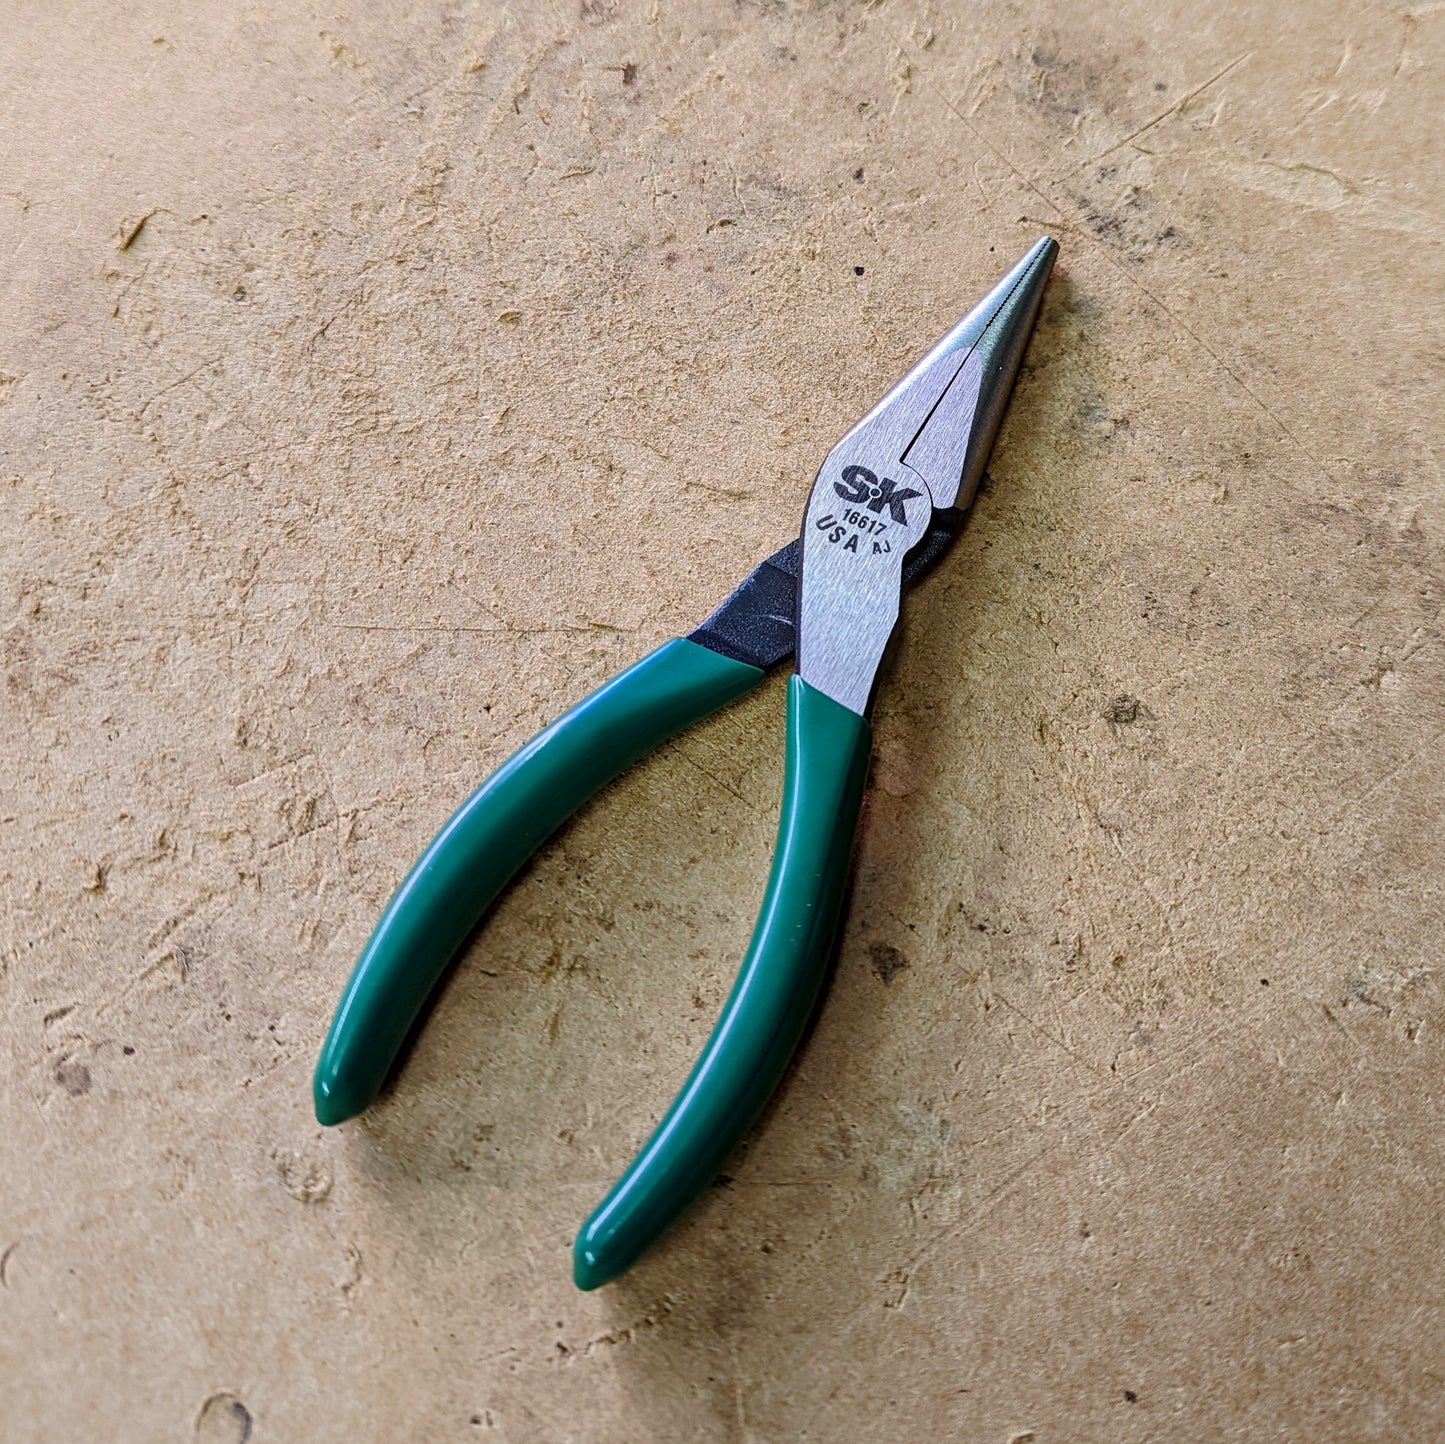 SK Hand Tool 6 1/2" Long Nose Pliers (SK16617)